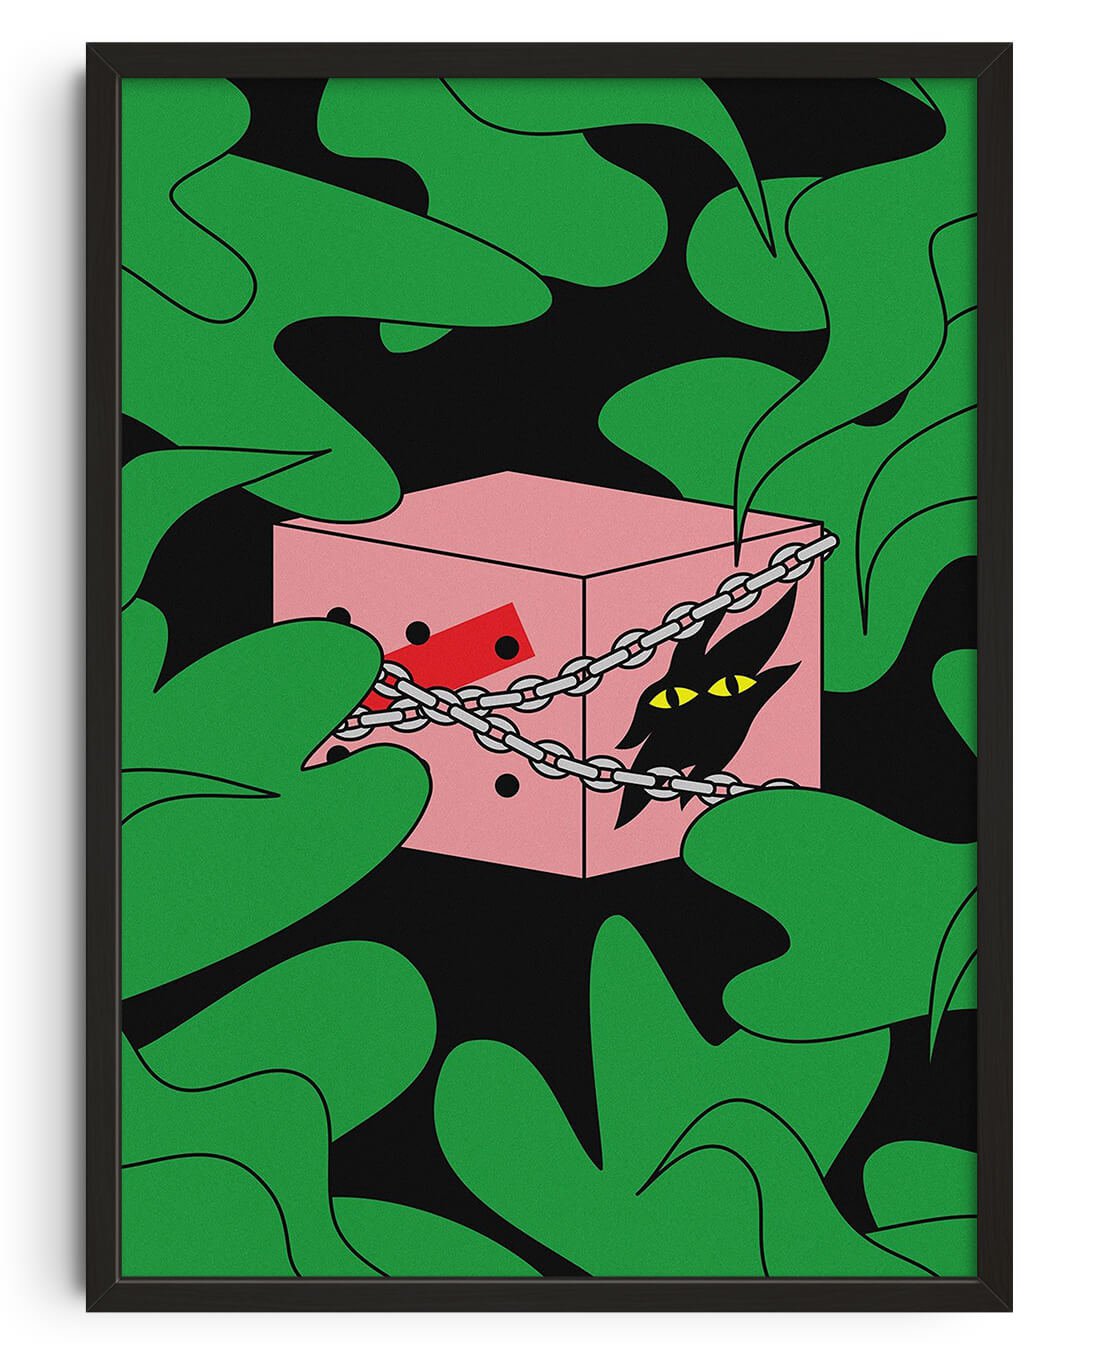 Beast in a box by GOOD OMEN contemporary wall art print from DROOL